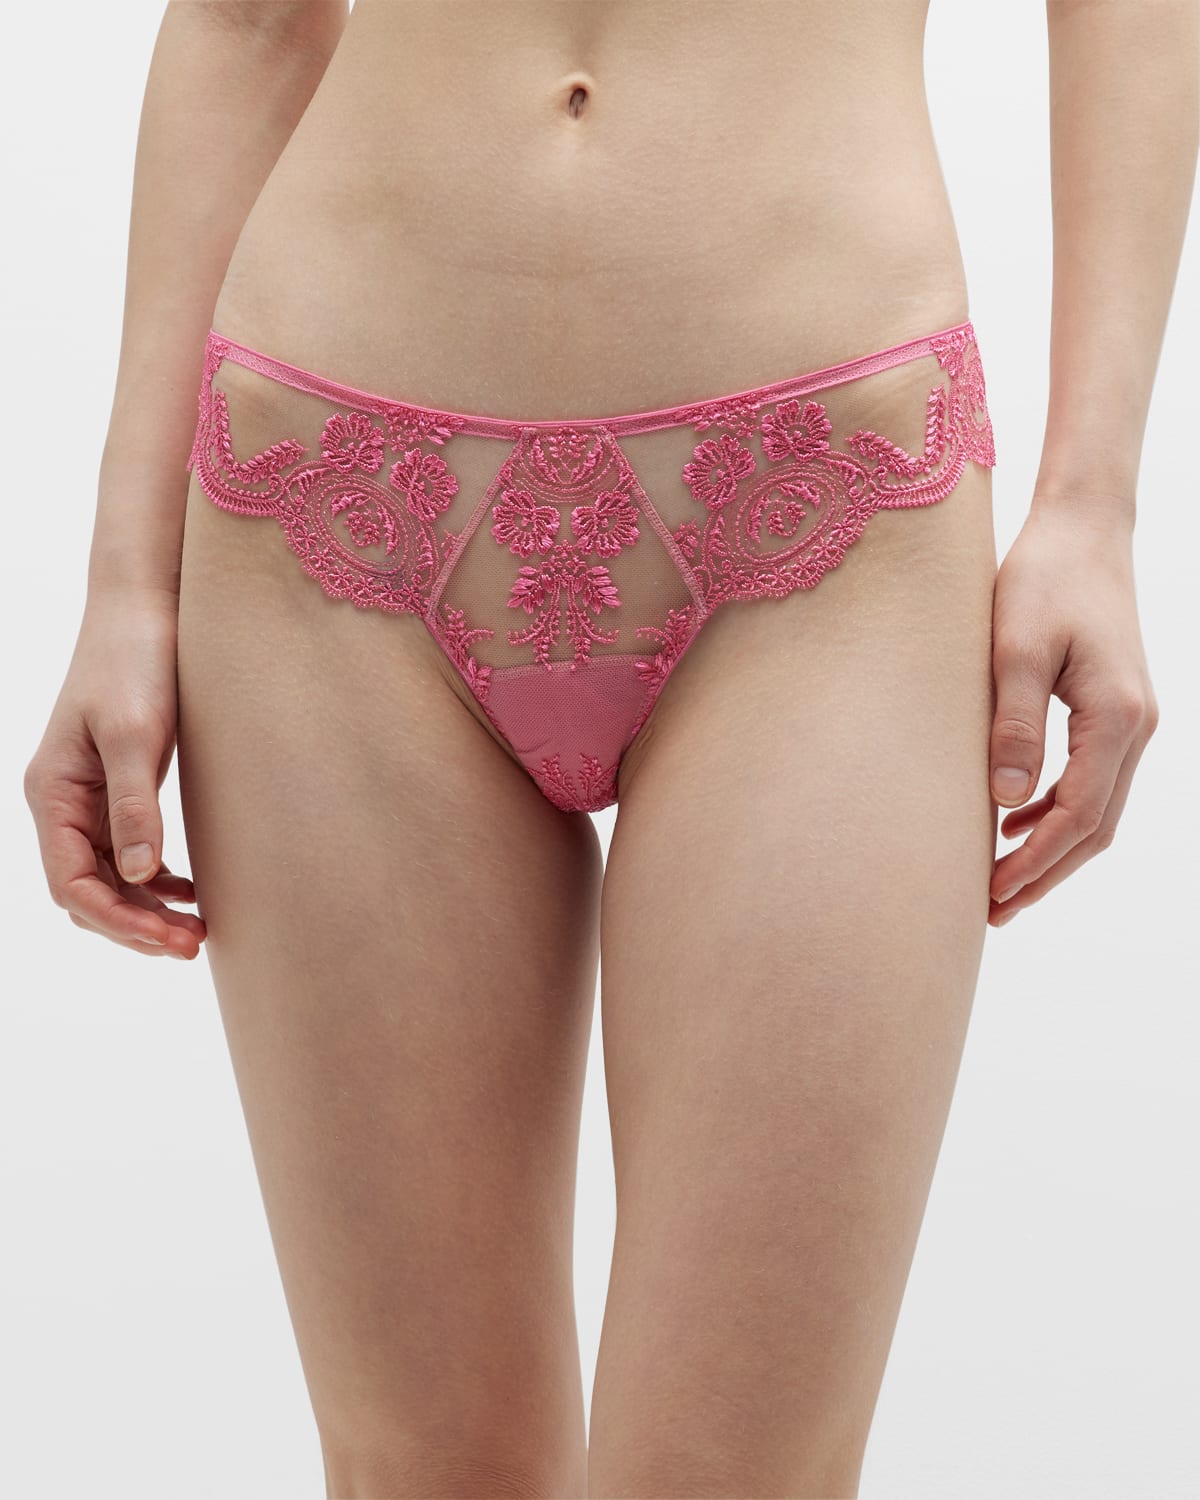 Pixie Dreams Scalloped Longline Thong